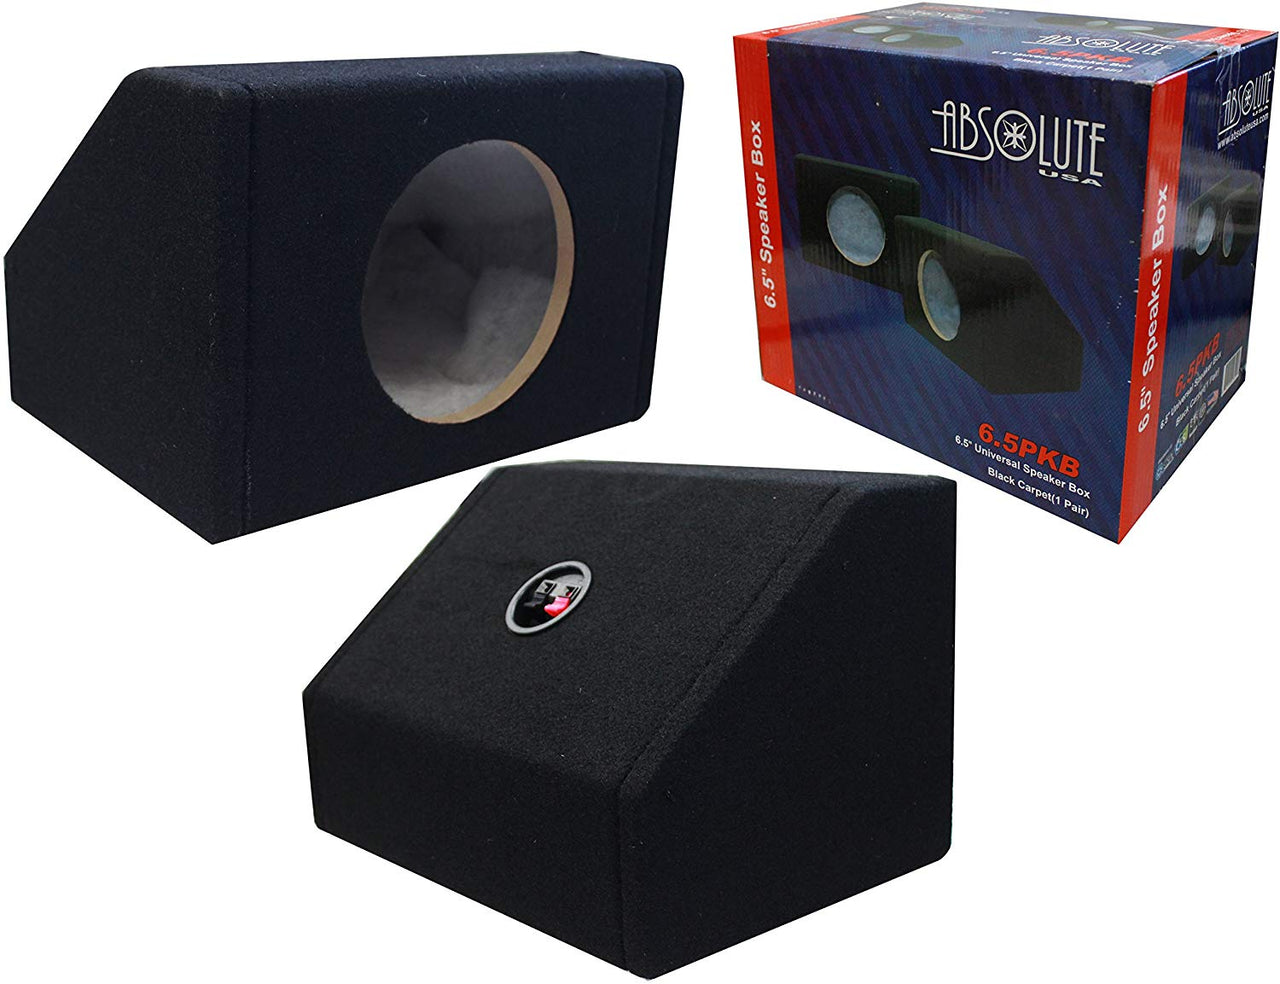 Absolute USA 6X9PKB 6 X 9 Inches Angled/Wedge Box Speakers, Set of Two (Black)